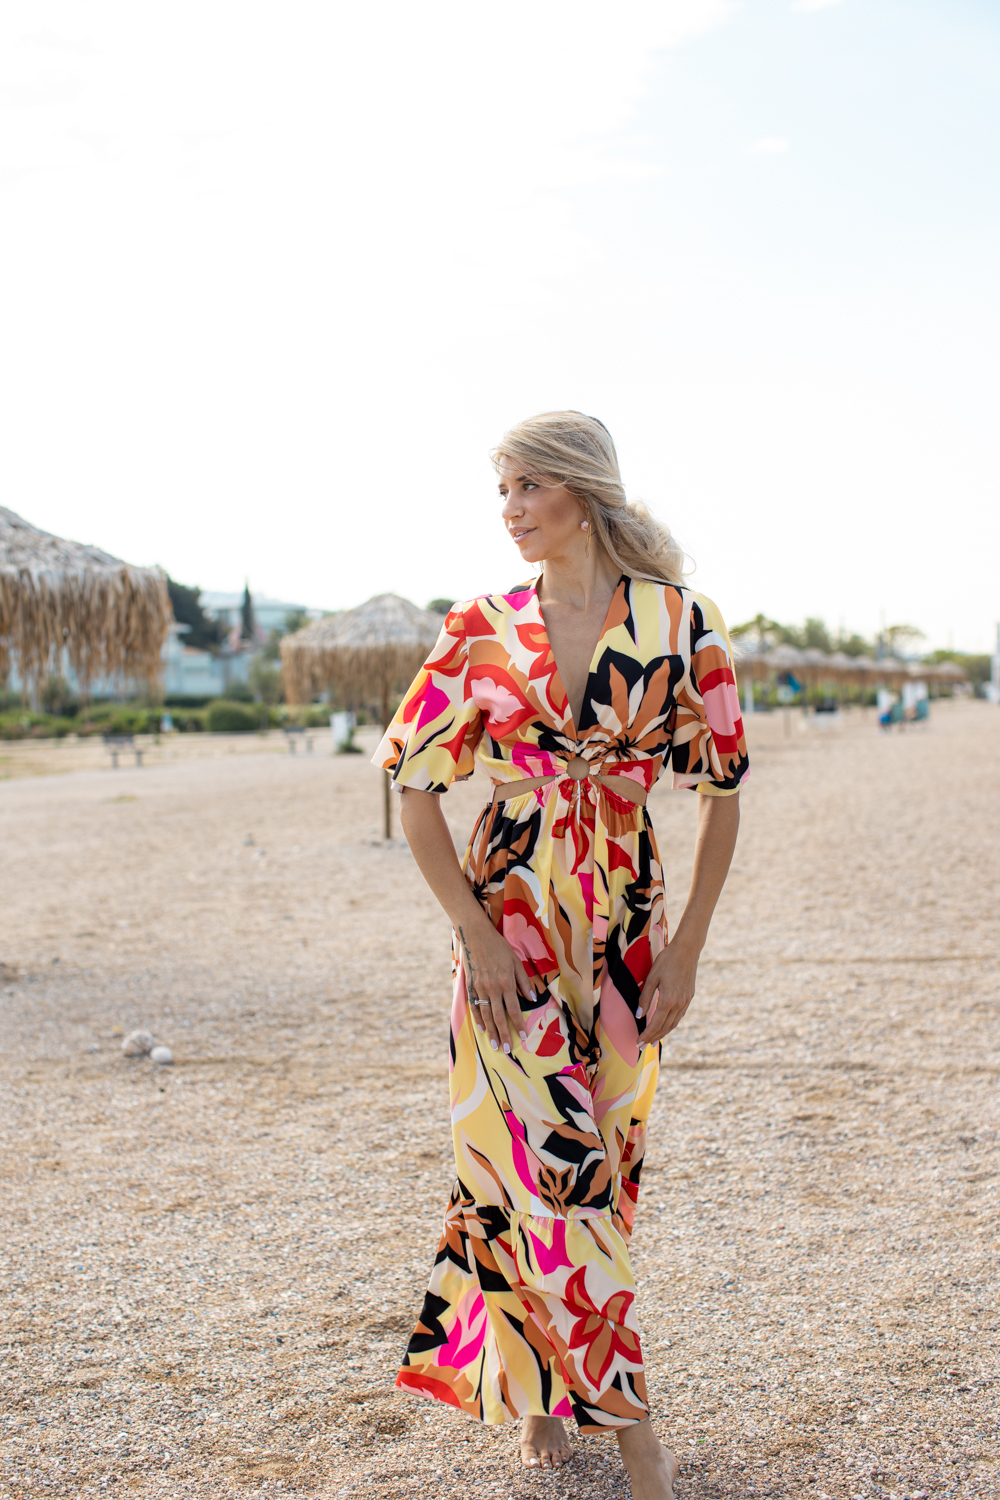 Blonde woman wearing Summer Airy Dress with geometric patterns